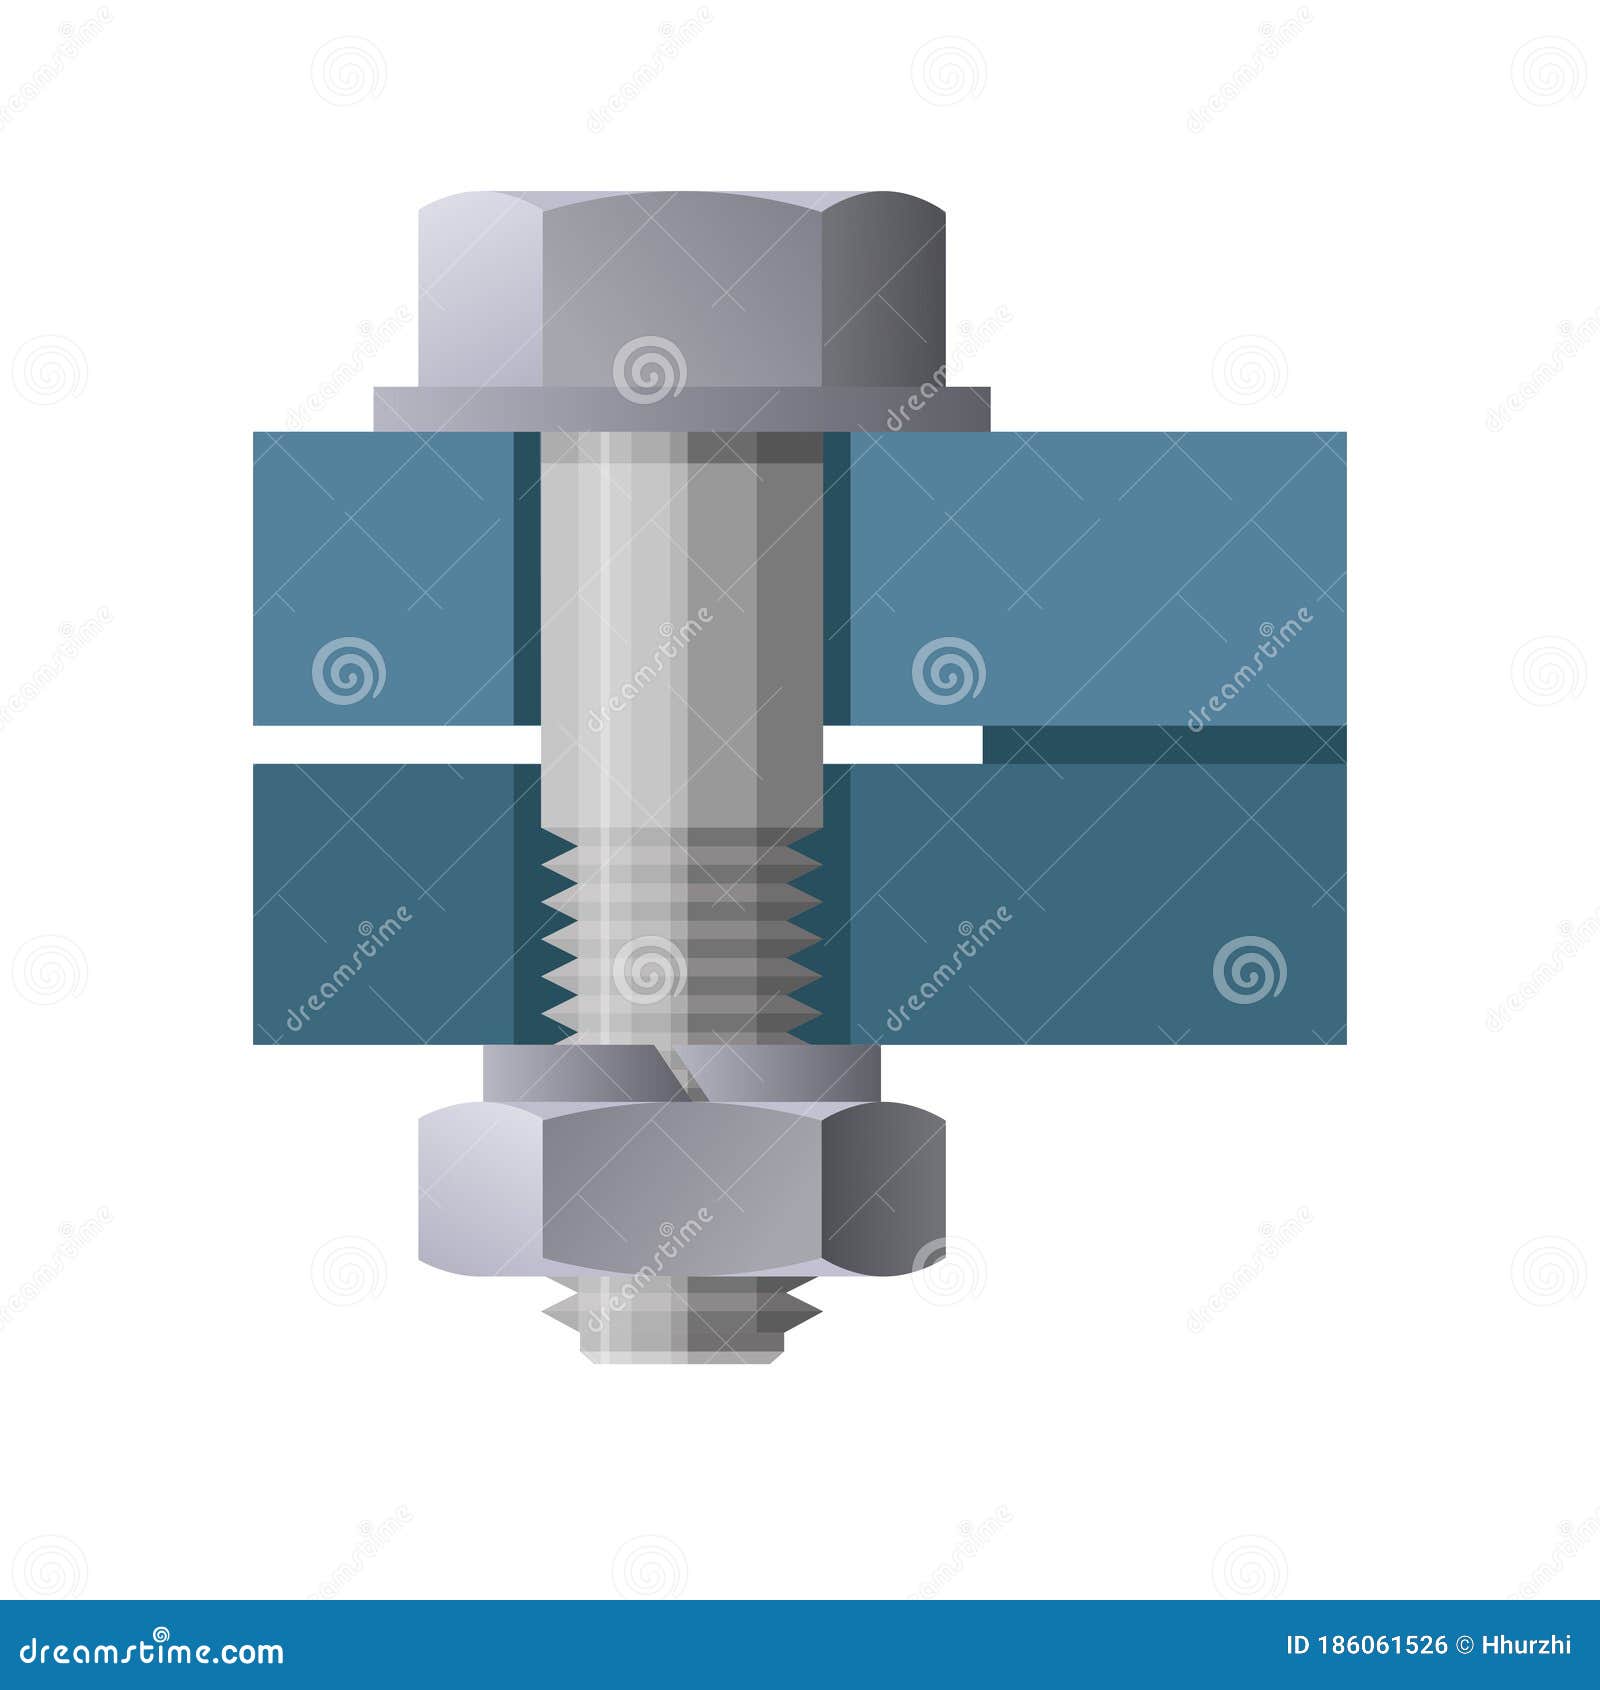 flange connection with hex bolt, nut and washer